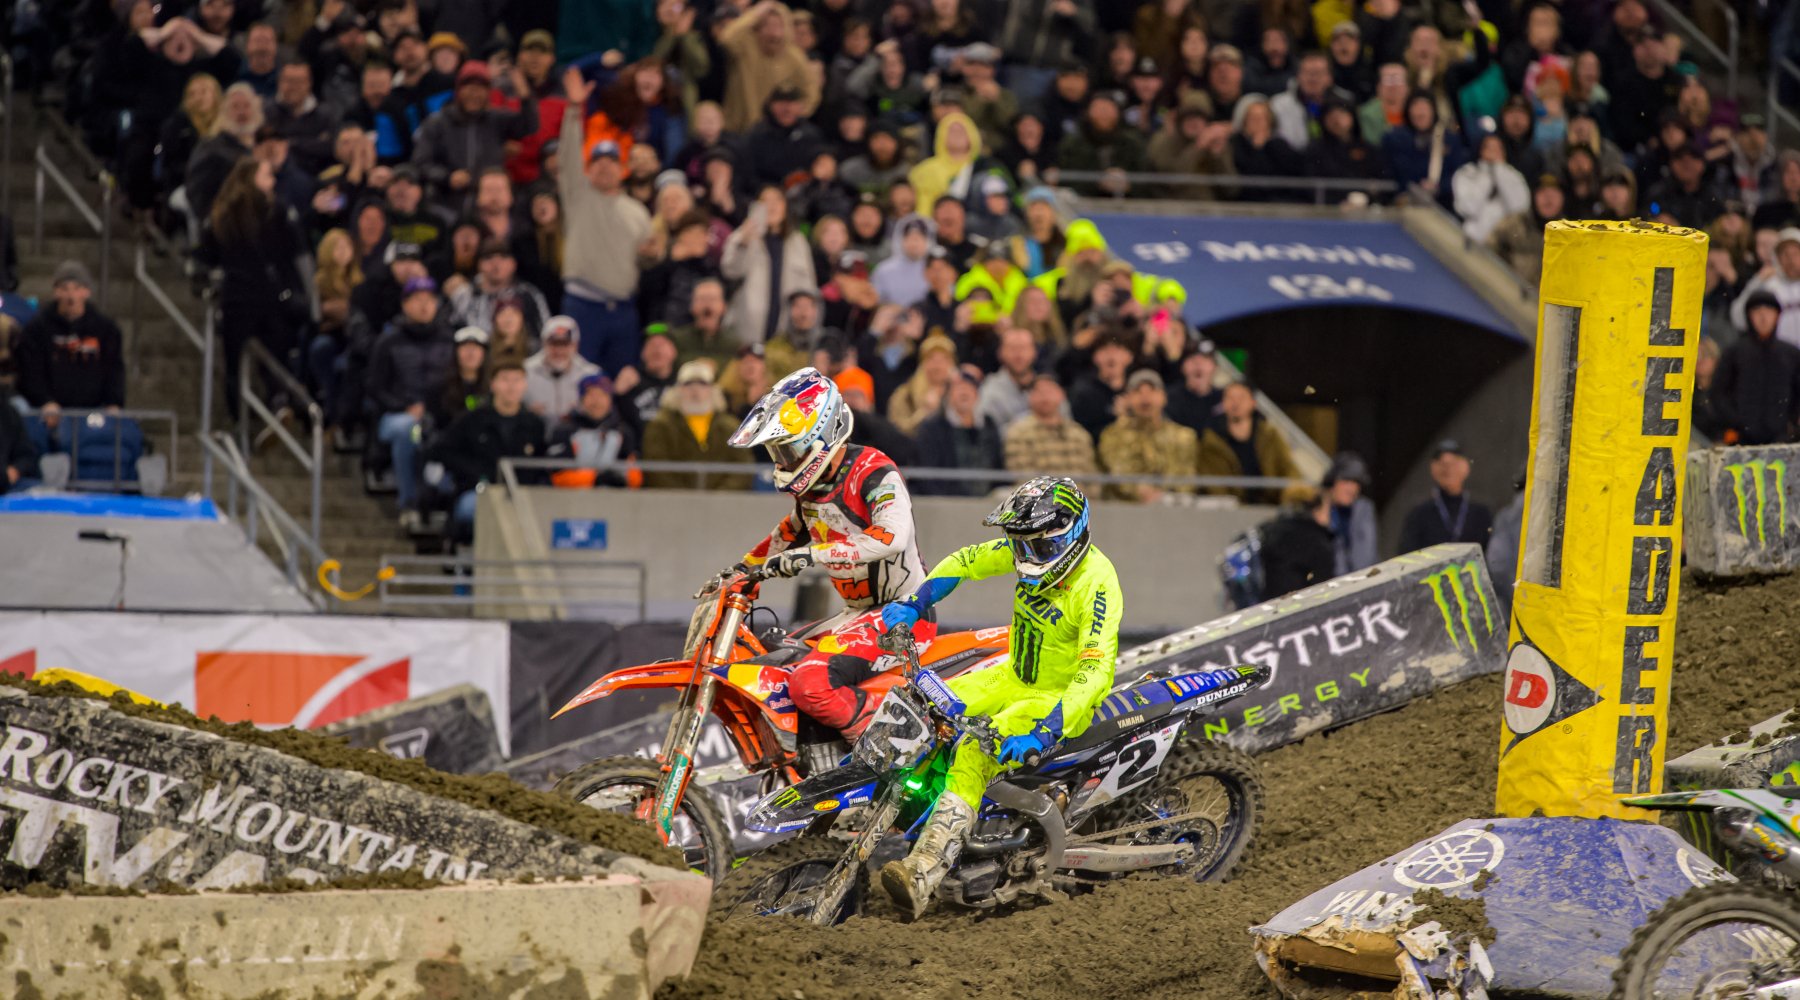 Chase Sexton and Cooper Webb battle for the win